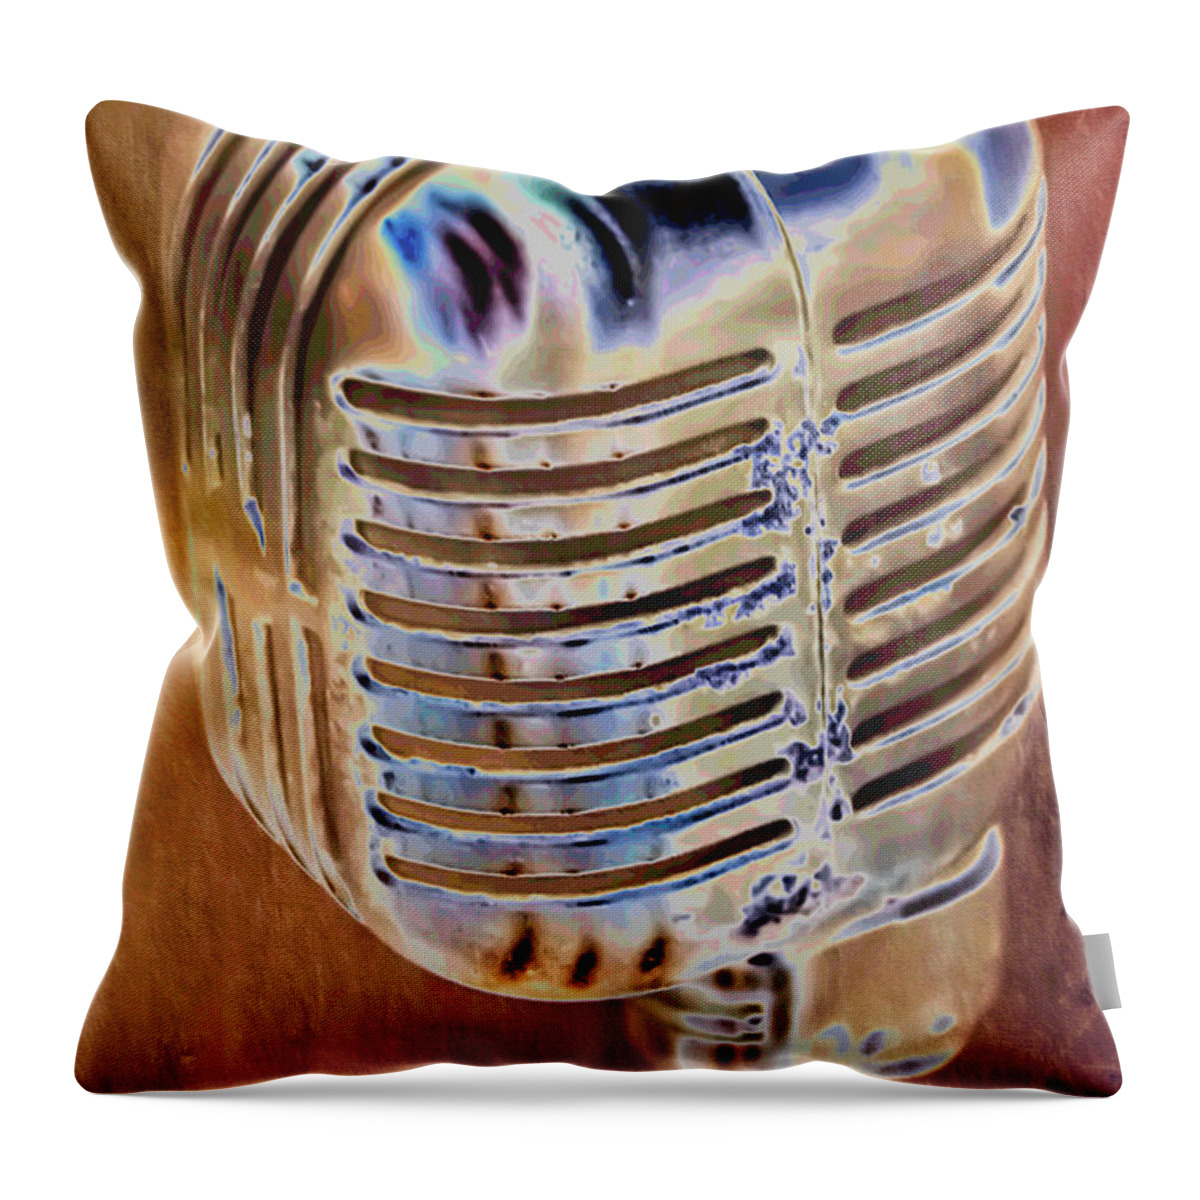 Music Throw Pillow featuring the photograph Vintage Microphone by Pamela Williams